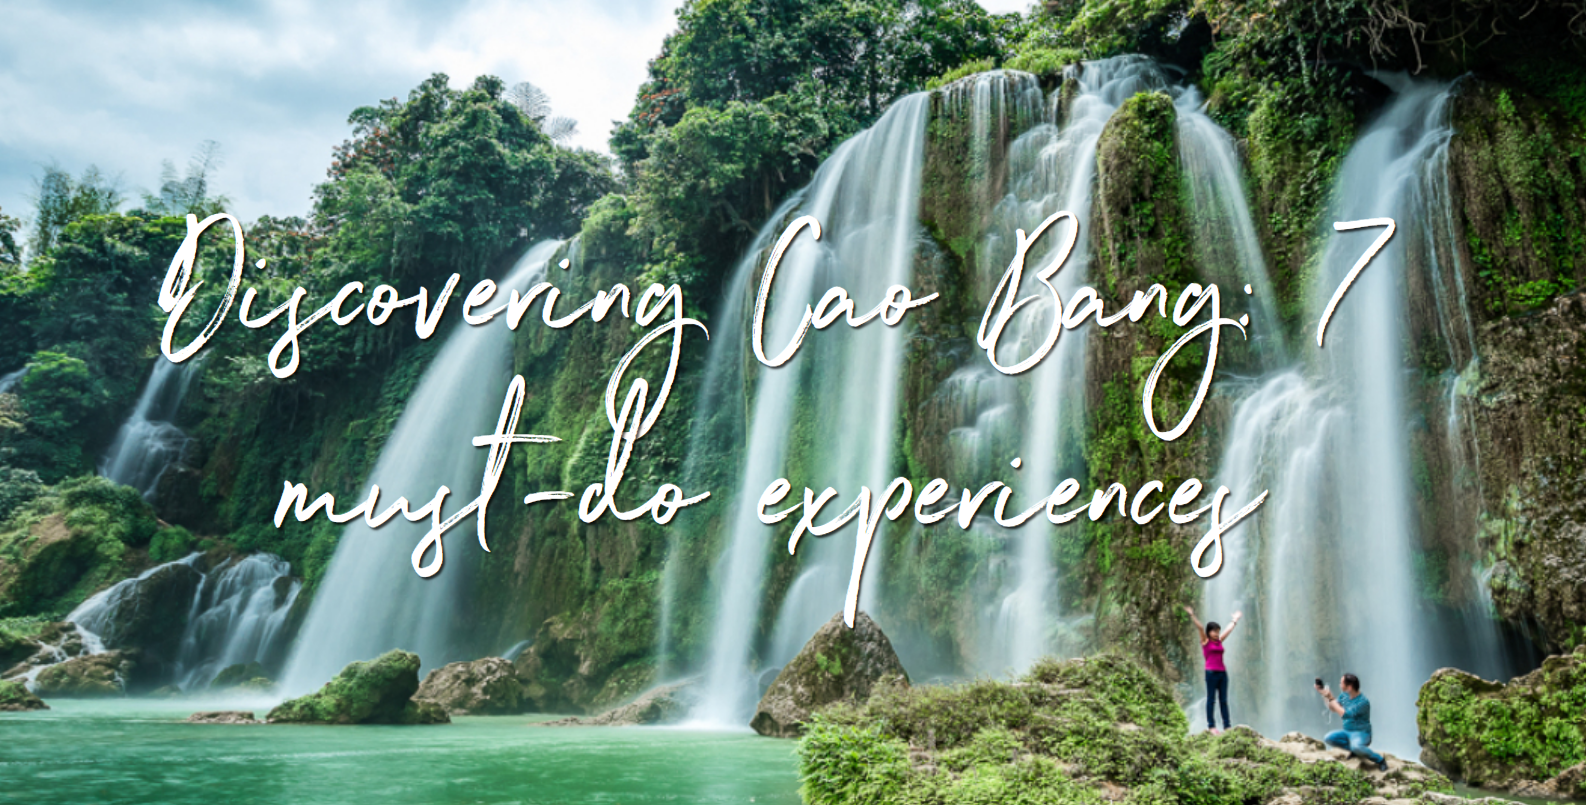 Some Experiences You Need to Do in Cao Bang